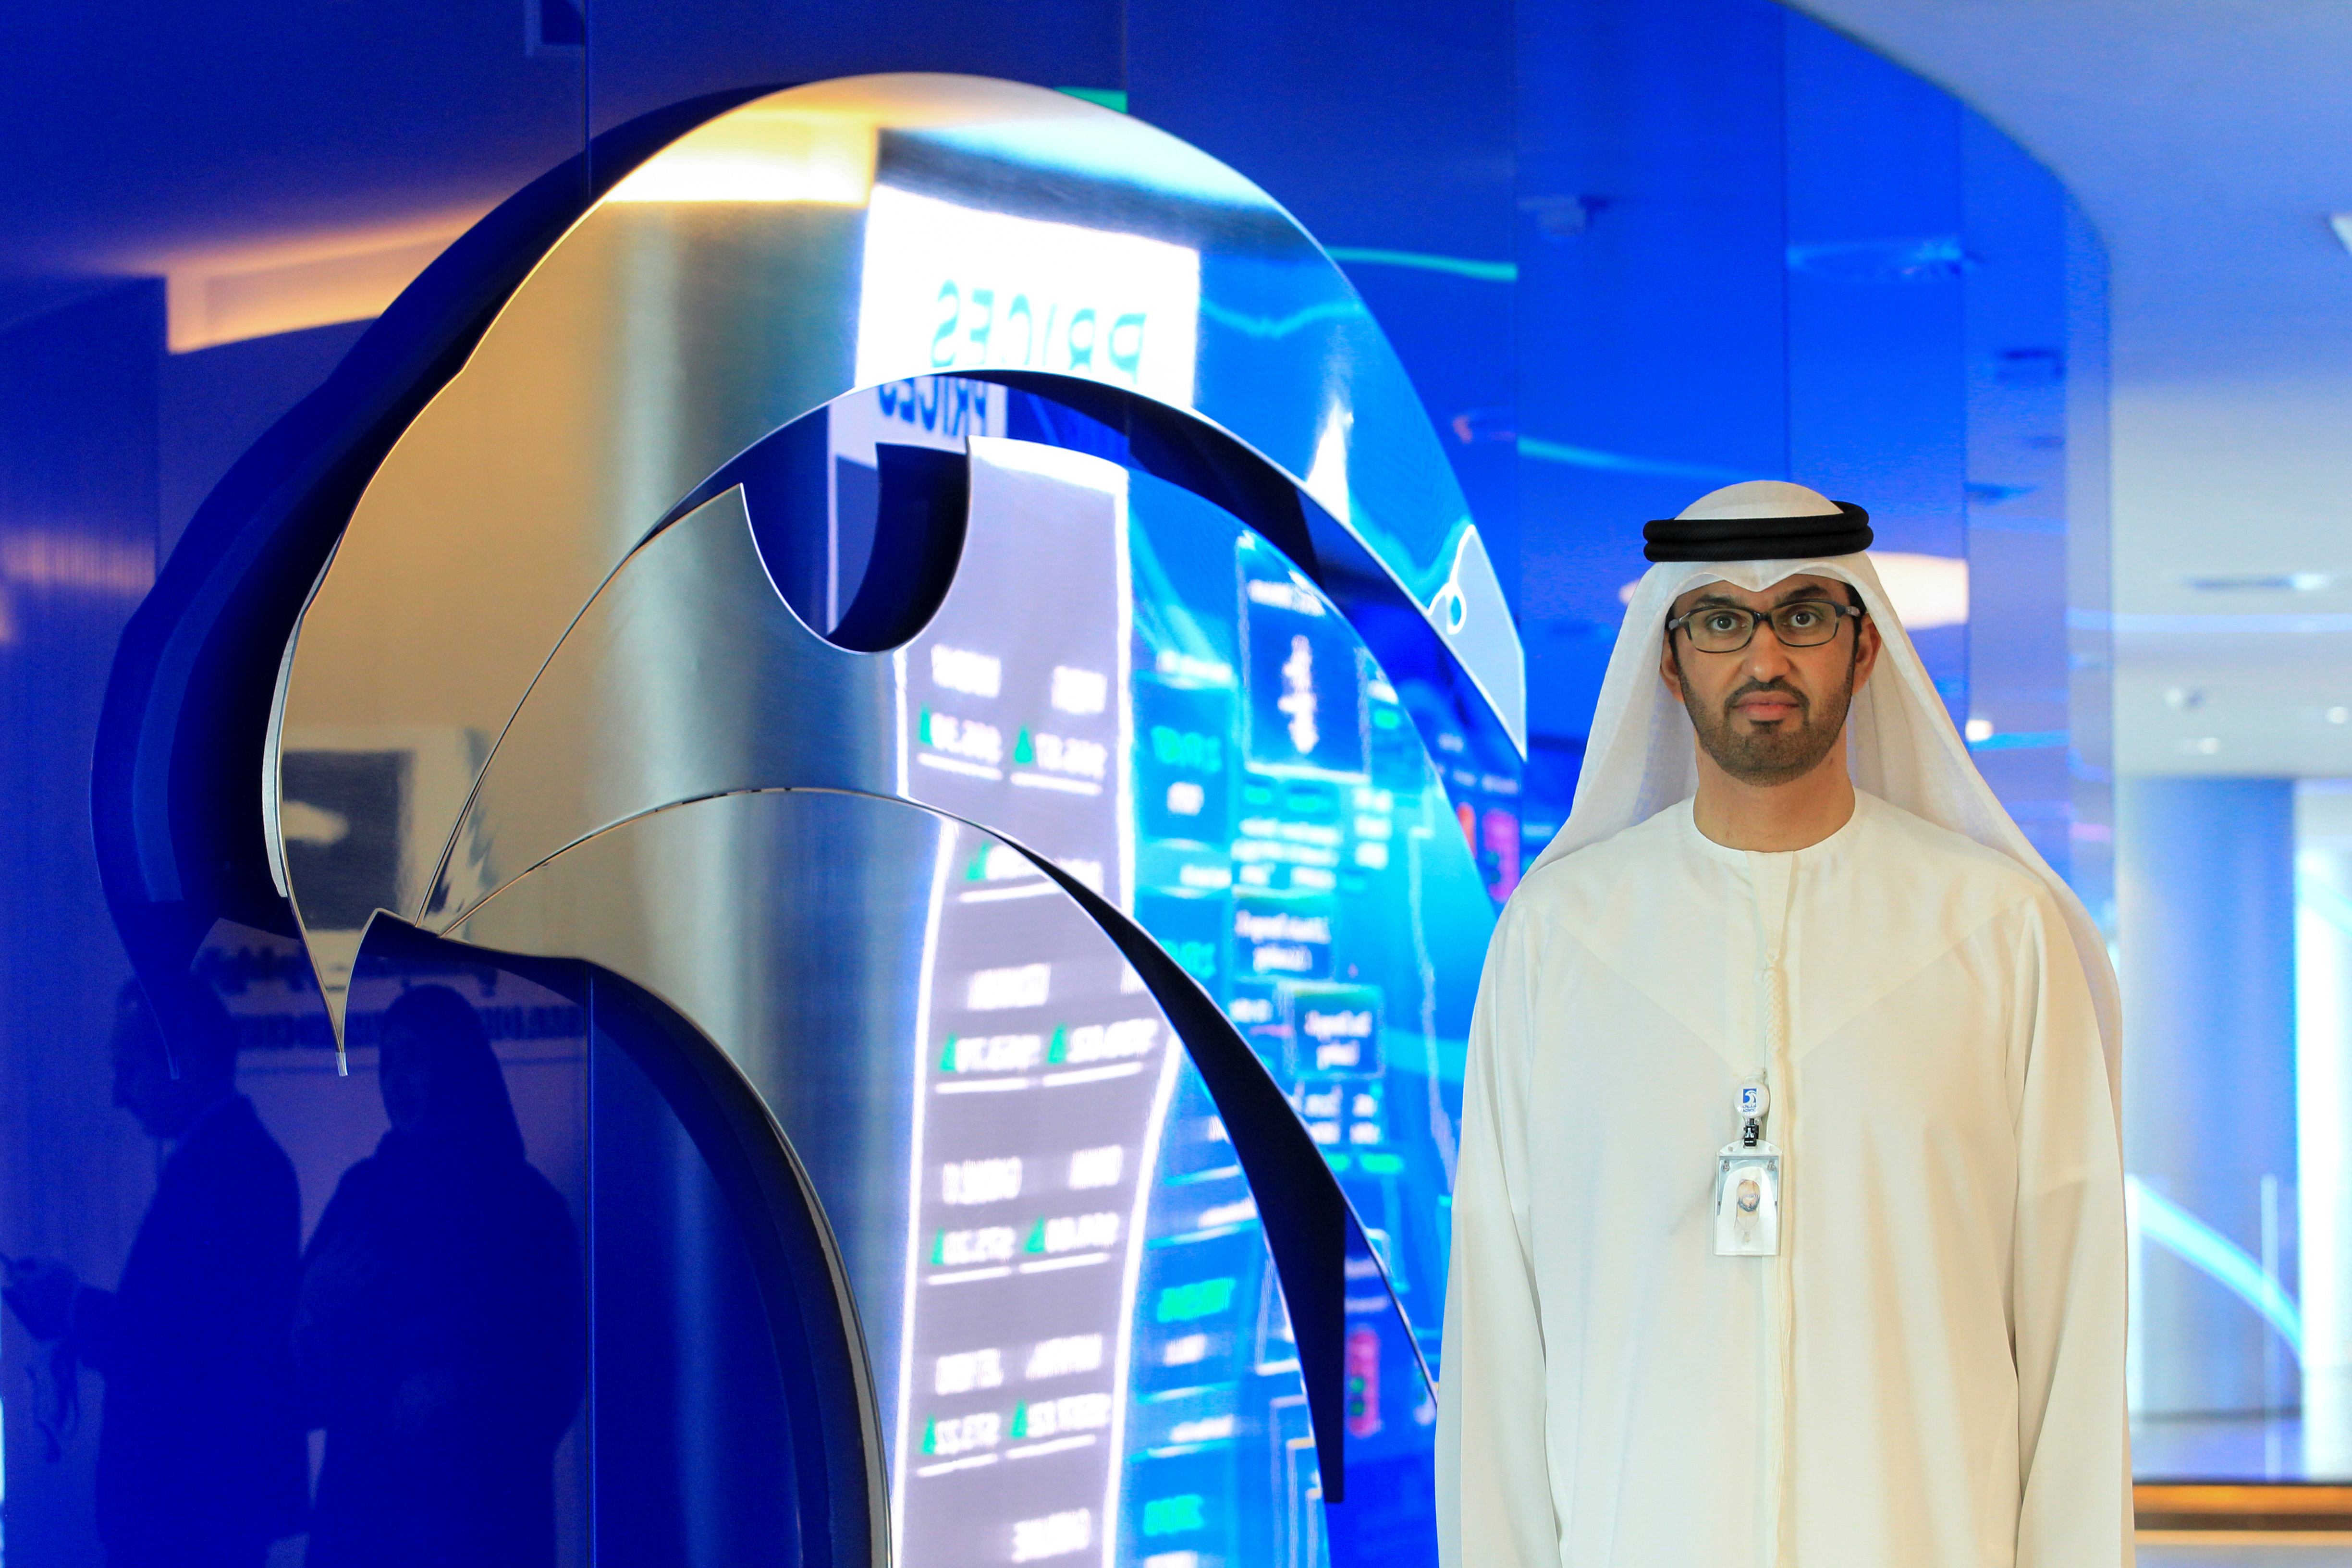 Sultan Ahmed Al Jaber, UAE Minister of State and the Abu Dhabi National Oil Company (ADNOC) Group CEO poses during the interview at the Panorama Digital Command Centre at the ADNOC headquarters in Abu Dhabi, UAE December 10, 2019. REUTERS/Satish Kumar